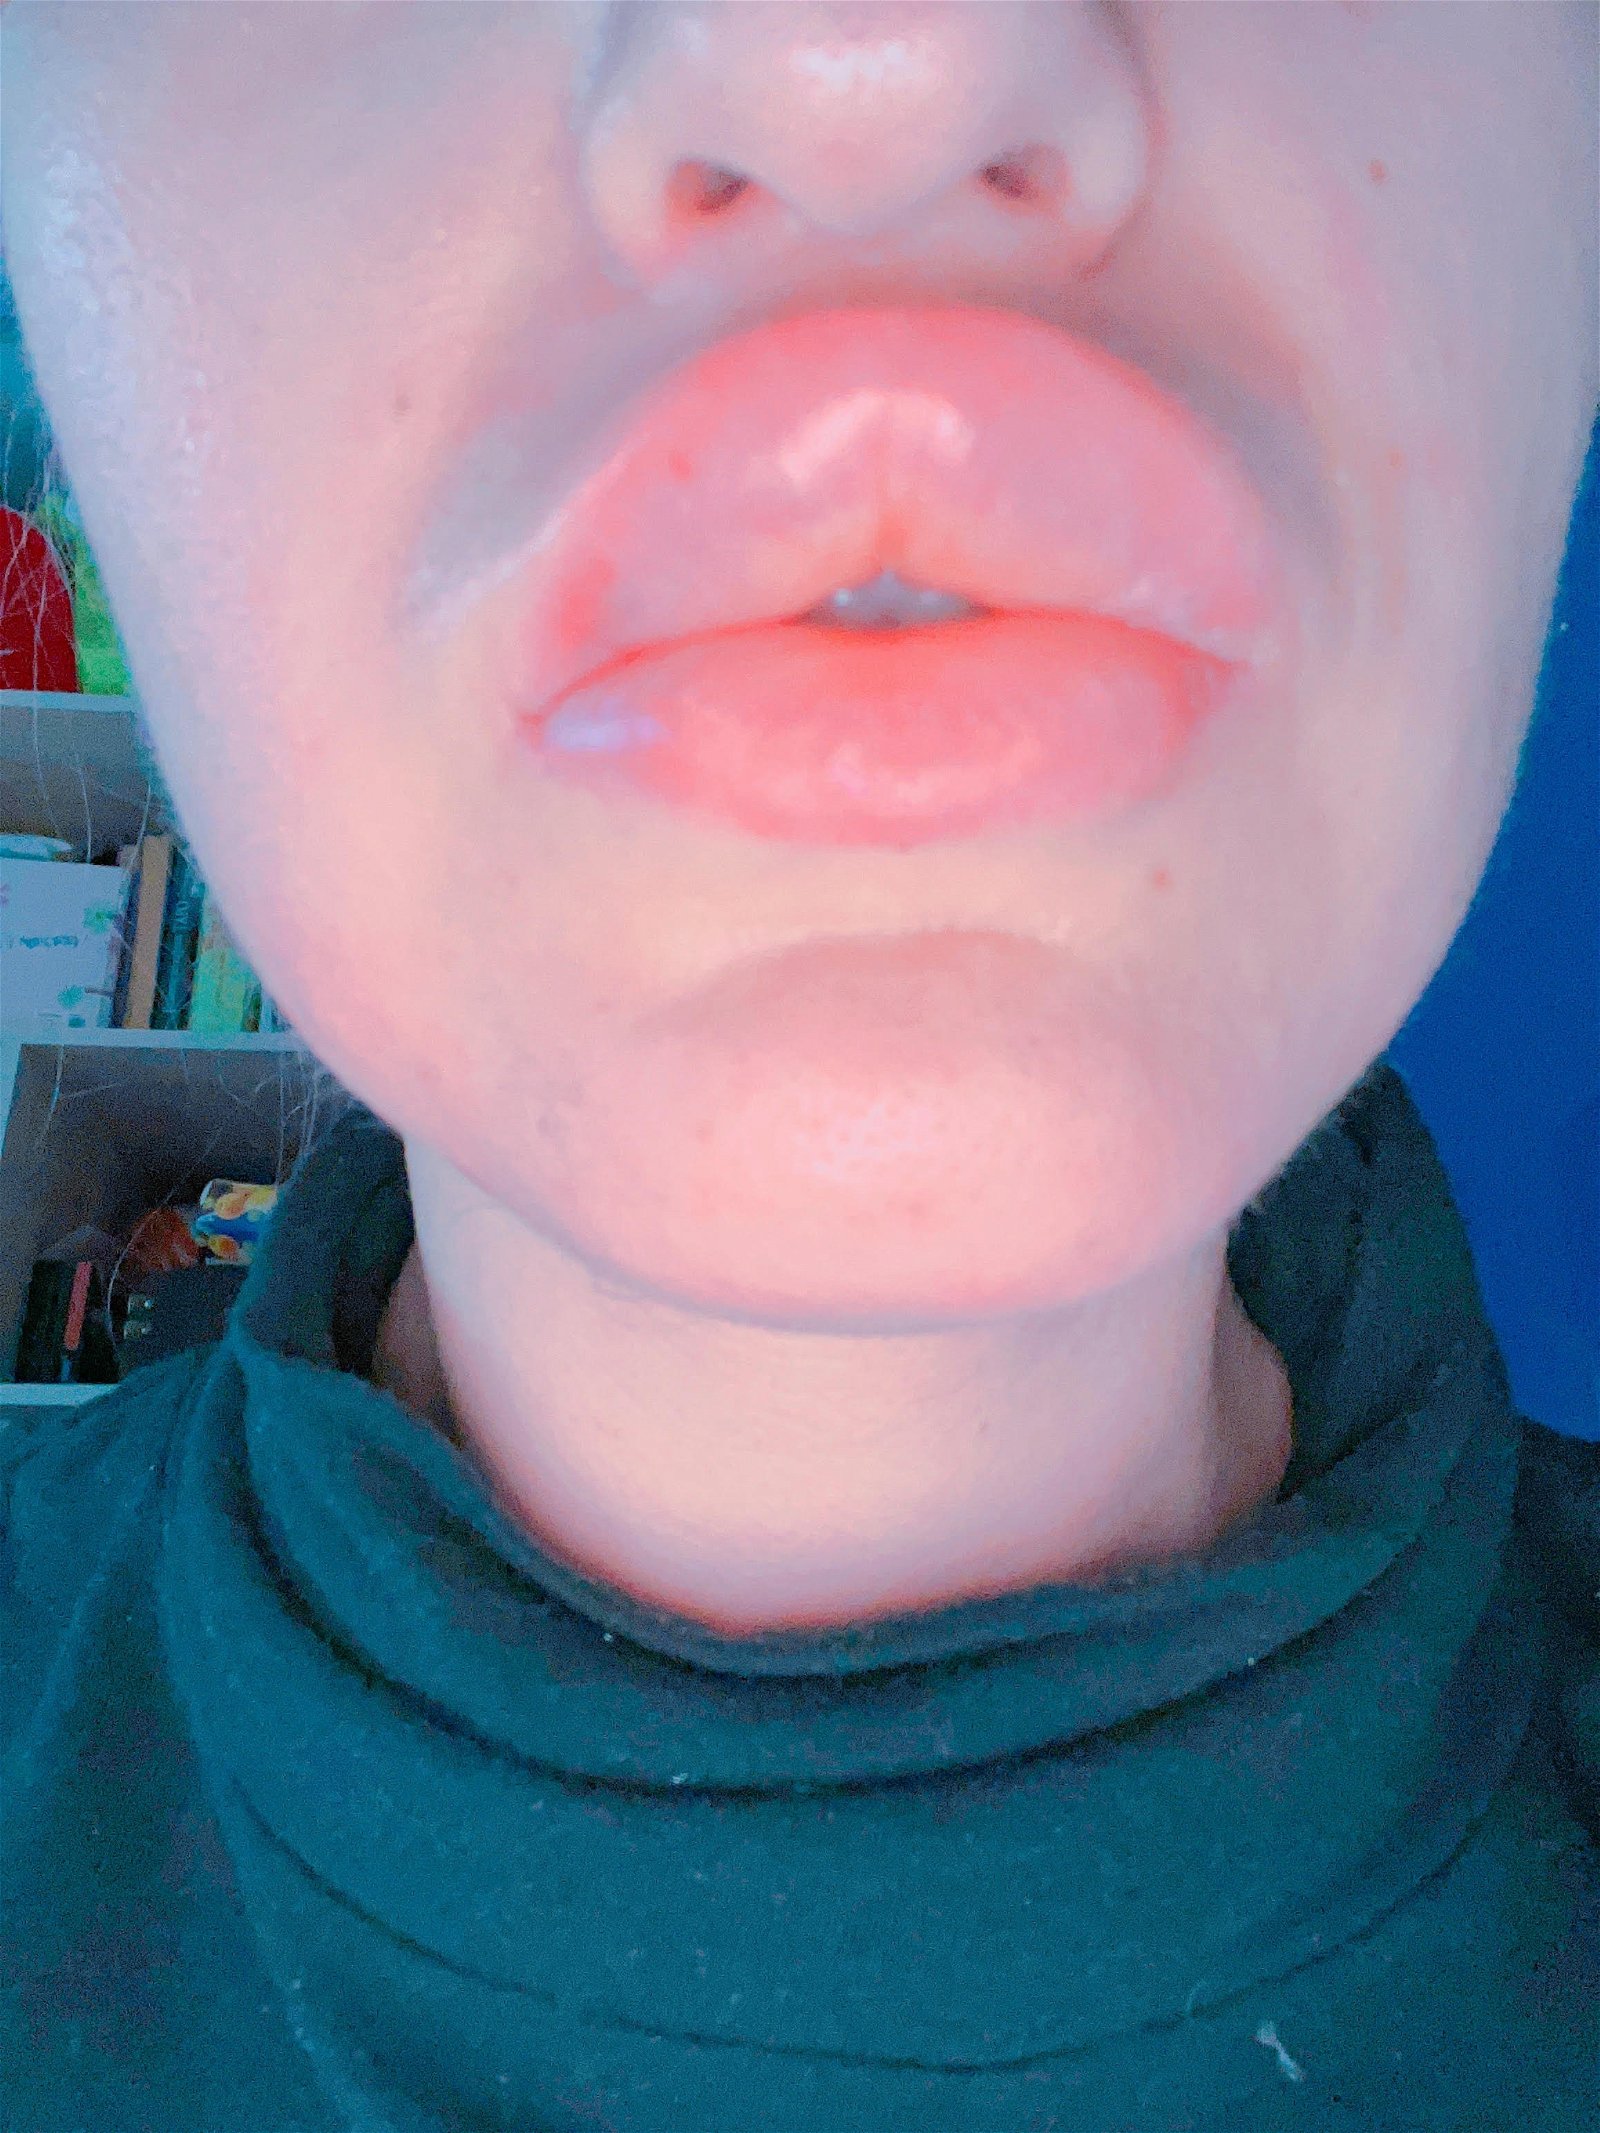 Watch the Photo by FinDom Goaldigger with the username @findomgoaldigger, who is a star user, posted on October 31, 2022 and the text says 'Lip Fillers Donation Target for BIG LIPS LOVERS! Pay for my fillers in my lips what I did this Friday! 28.10.2022 It cost 400$ #lipsfetish #biglips #fulllips TIP IN ONLYFANS OR  LOYALFANS + manyvids, clips4sale, iwantclips'